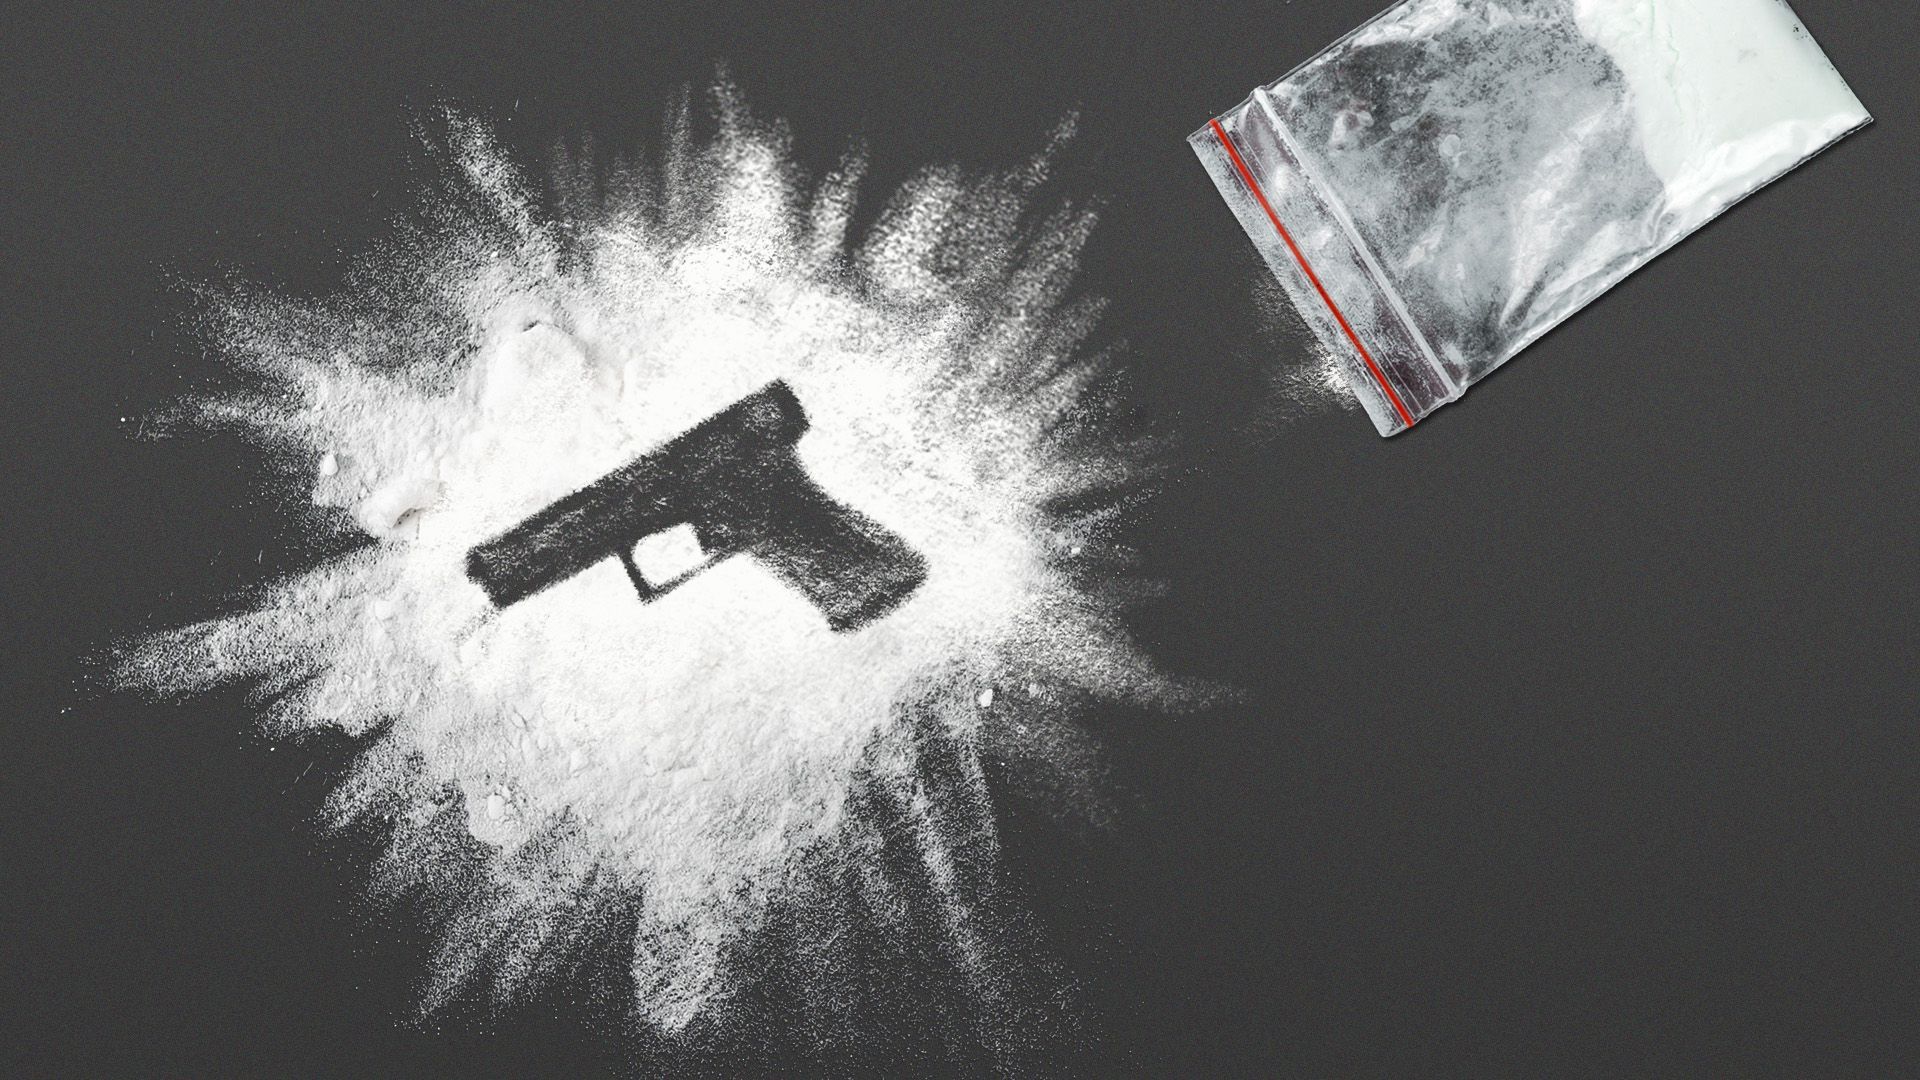 Illustration of a spilled bag of powdered drugs, with a silhouette of a gun in the negative space.